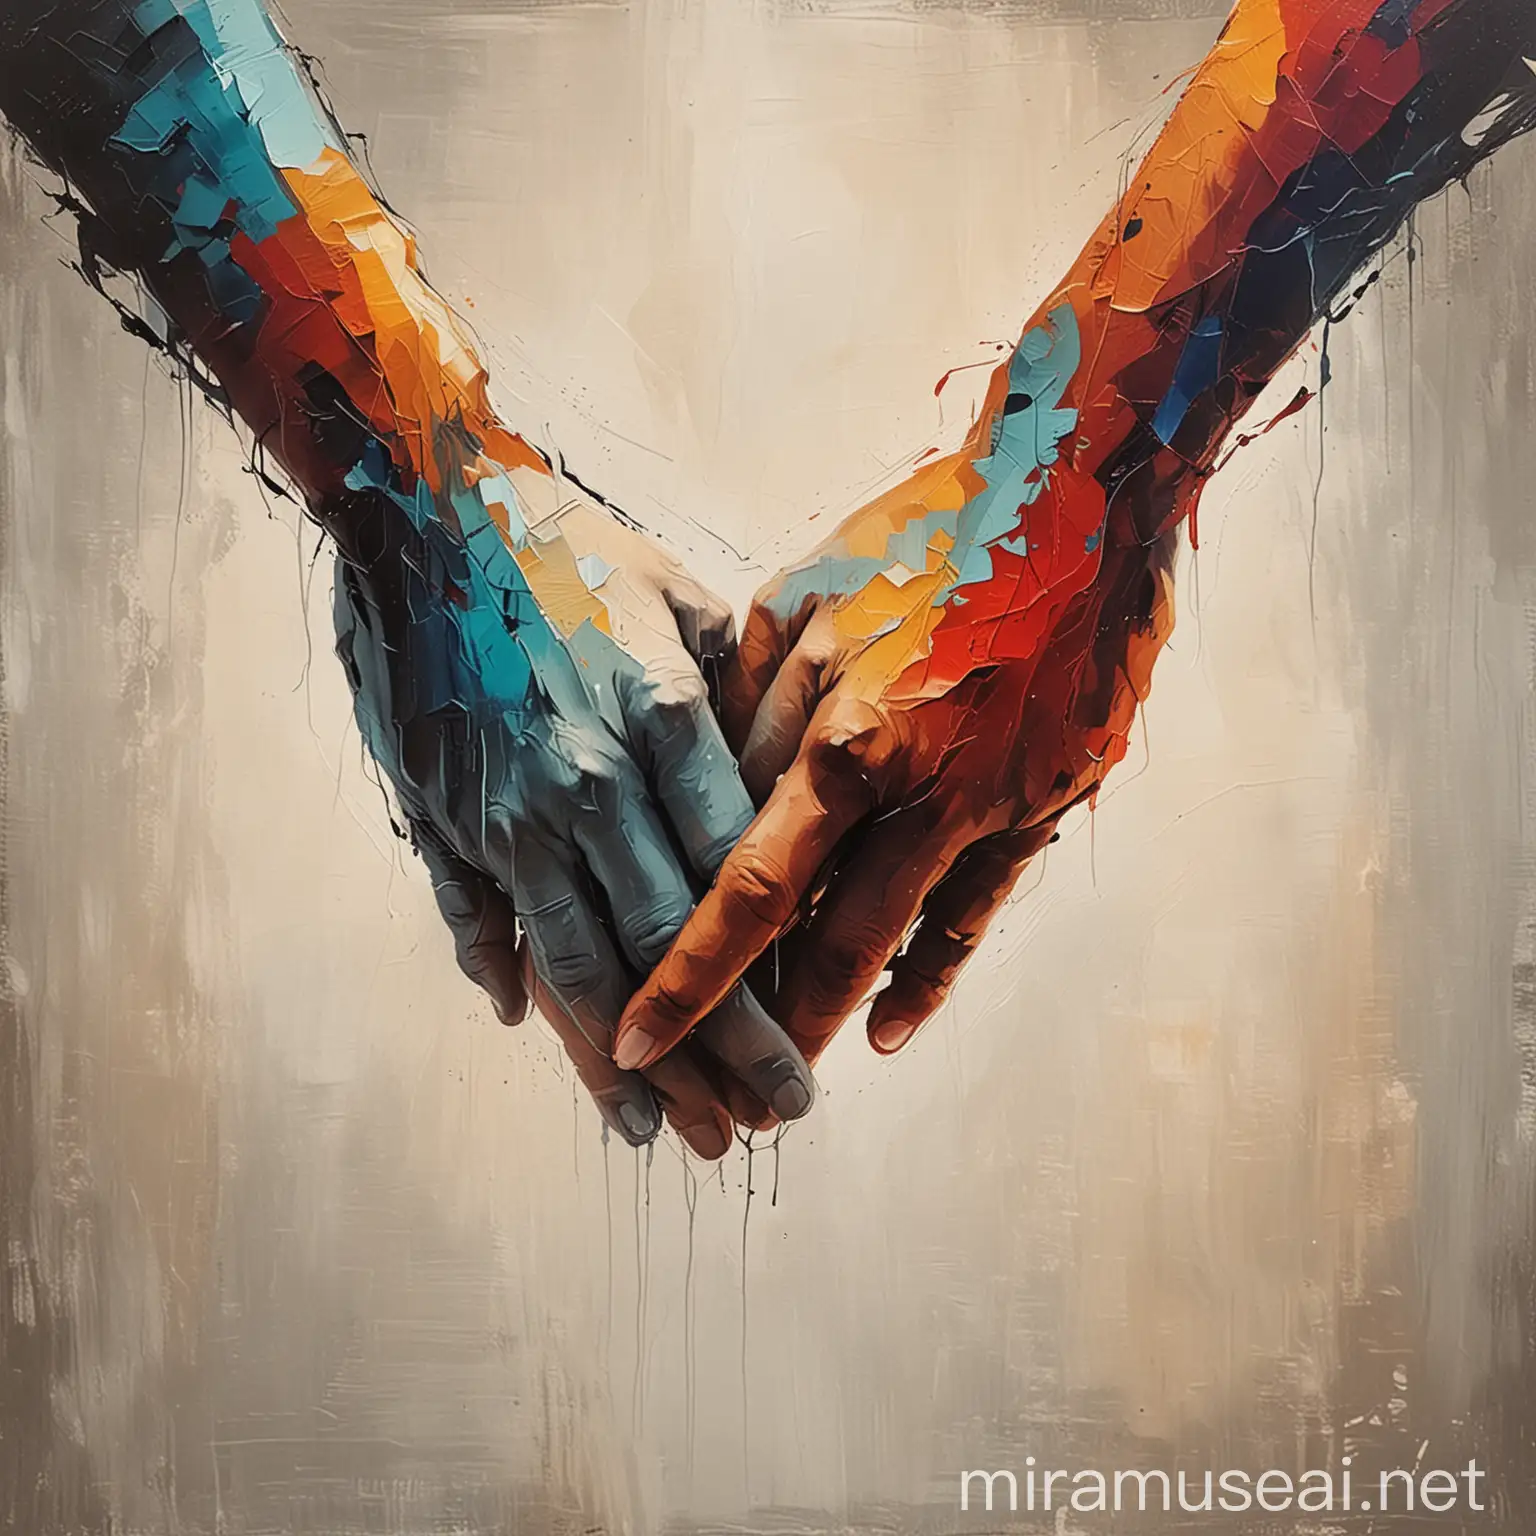 Vibrant Abstract Art Couple Embracing in Unity